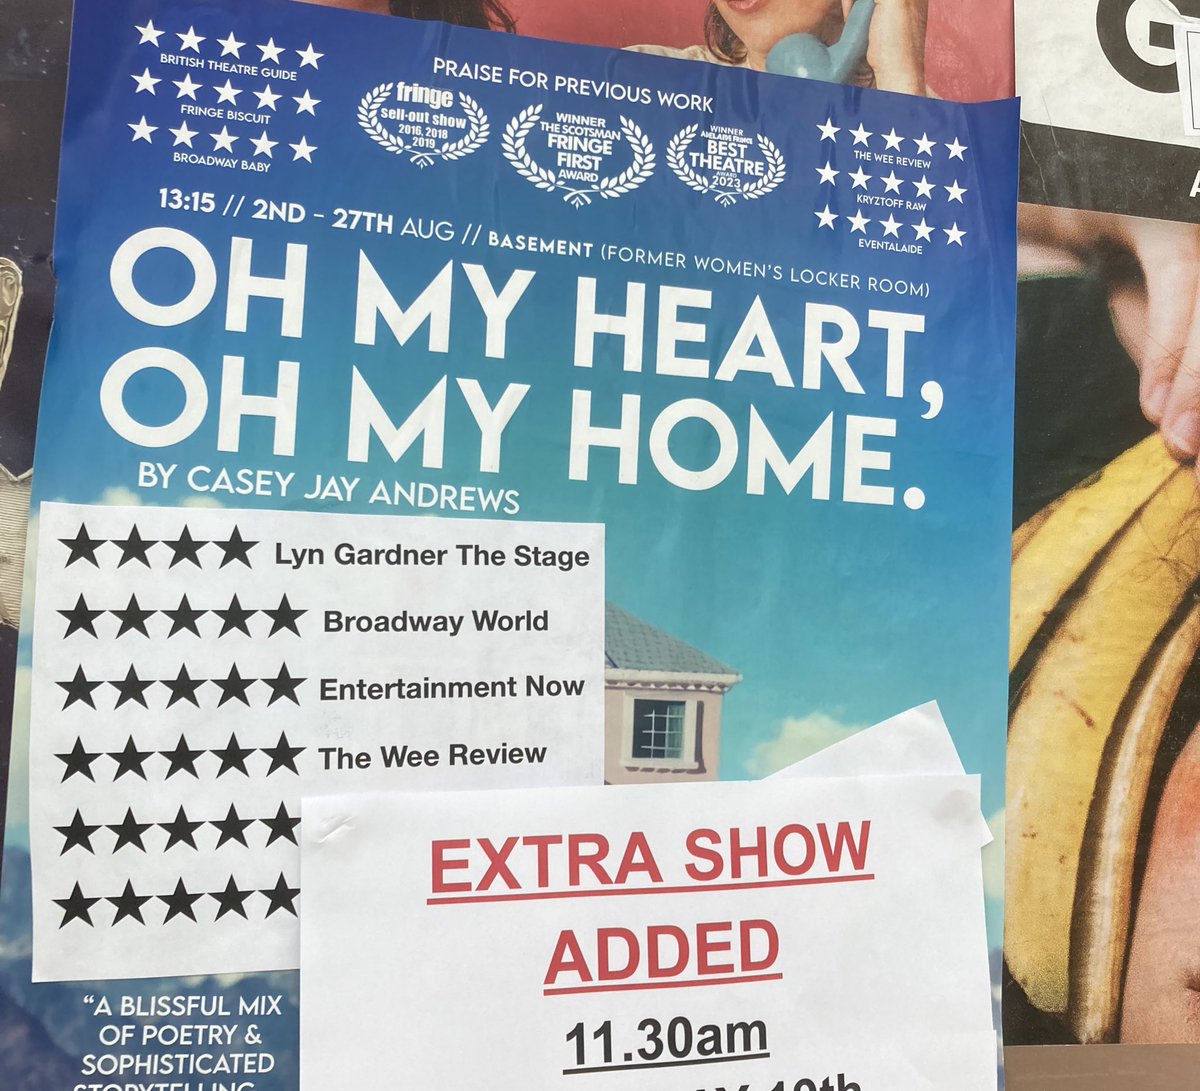 EXTRA SHOW “Oh My Heart, Oh My Home.” 11.30am - Saturday 26th @Summerhallery Tickets are almost sold out for the rest of the run - but some holds are released each morning so do check back on the day! Tickets: tickets.summerhall.co.uk/event/26:5658/